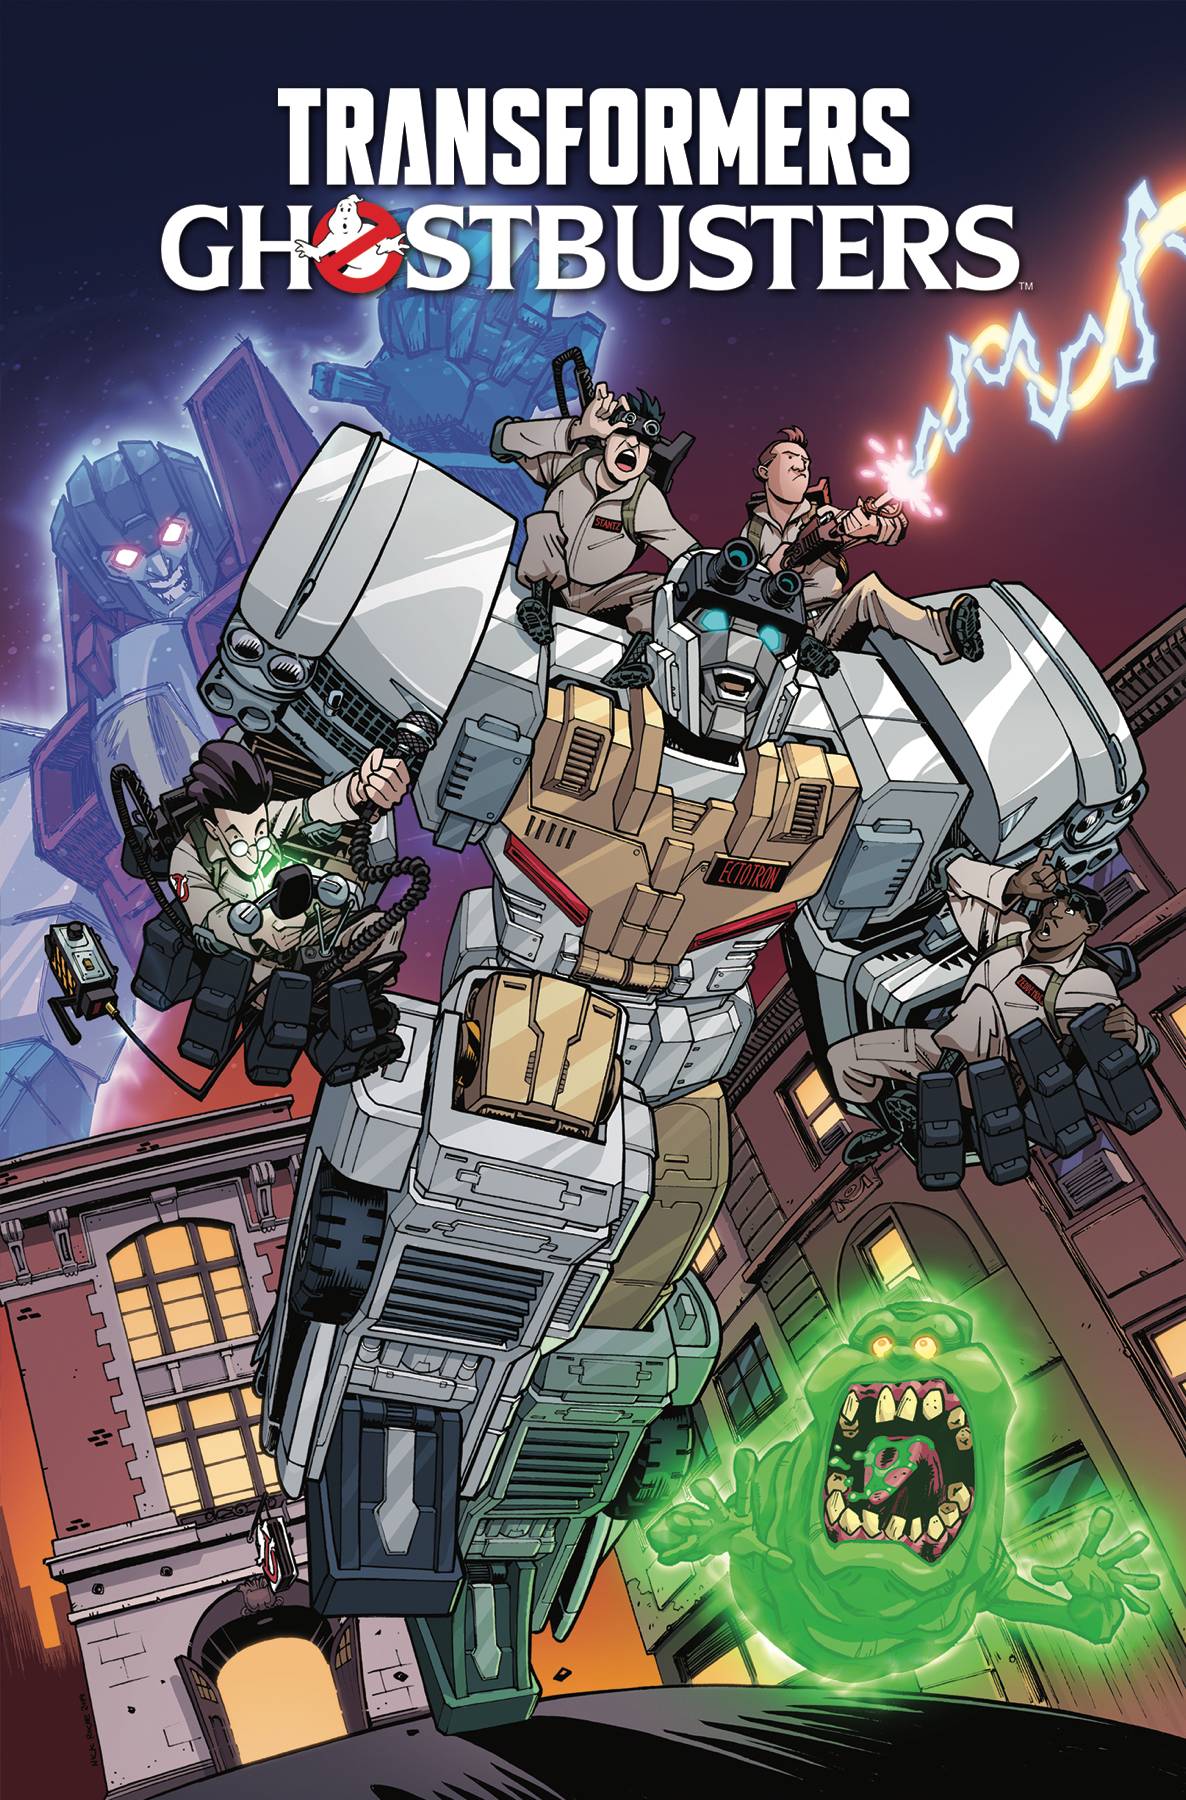 Transformers Ghostbusters Graphic Novel Volume 1 Ghosts of Cybertron